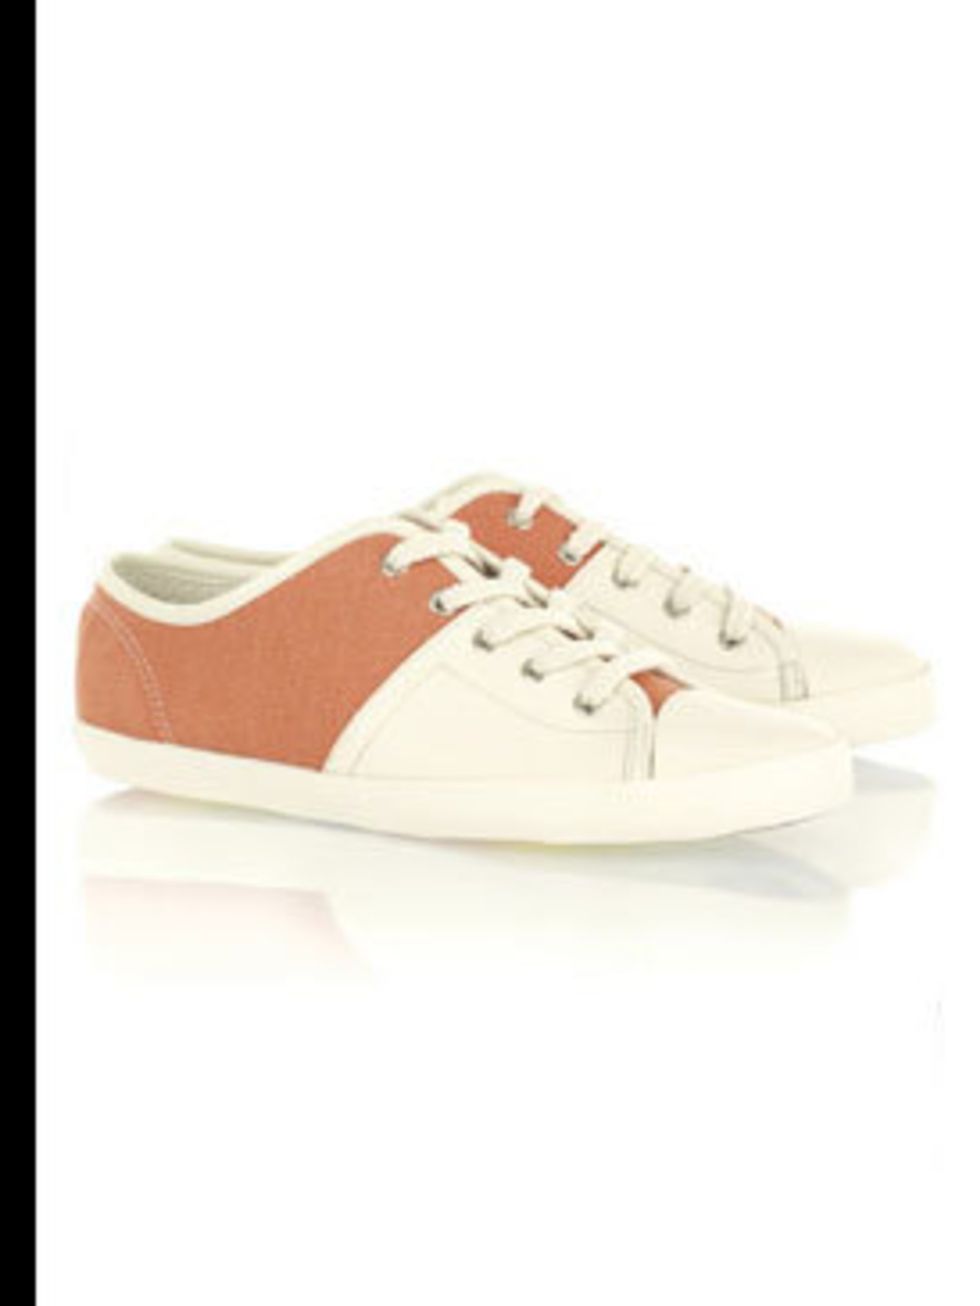 <p>Plimsolls, £108 by See by Chloe at <a href="http://www.net-a-porter.com/product/38721">Net-a-Porter</a></p>